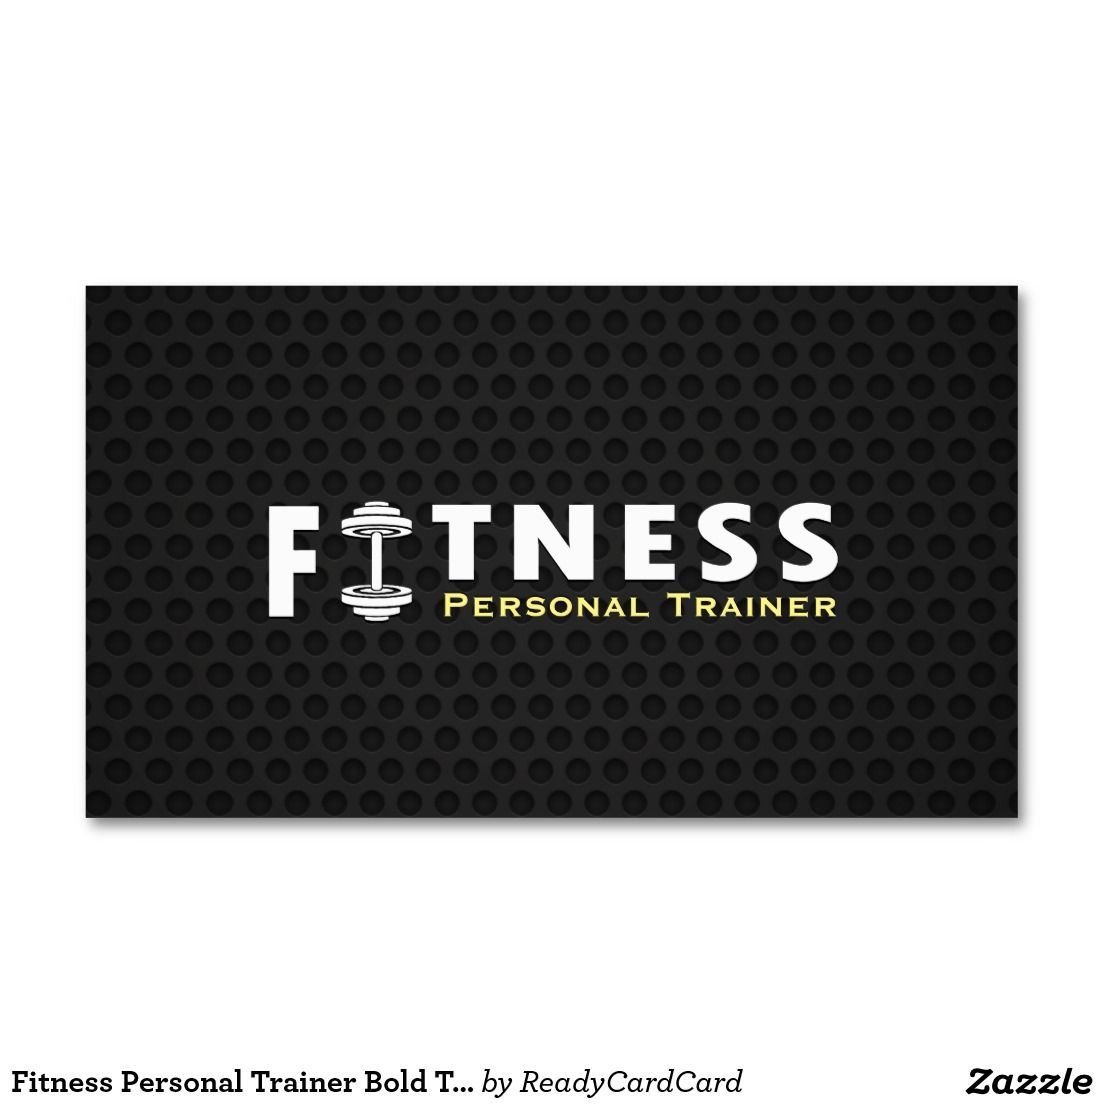 Fitness Personal Trainer Bold Text Dumbbell Logo Business Card | Zazzle.com - Fitness Personal Trainer Bold Text Dumbbell Logo Business Card | Zazzle.com -   15 lady fitness Logo ideas